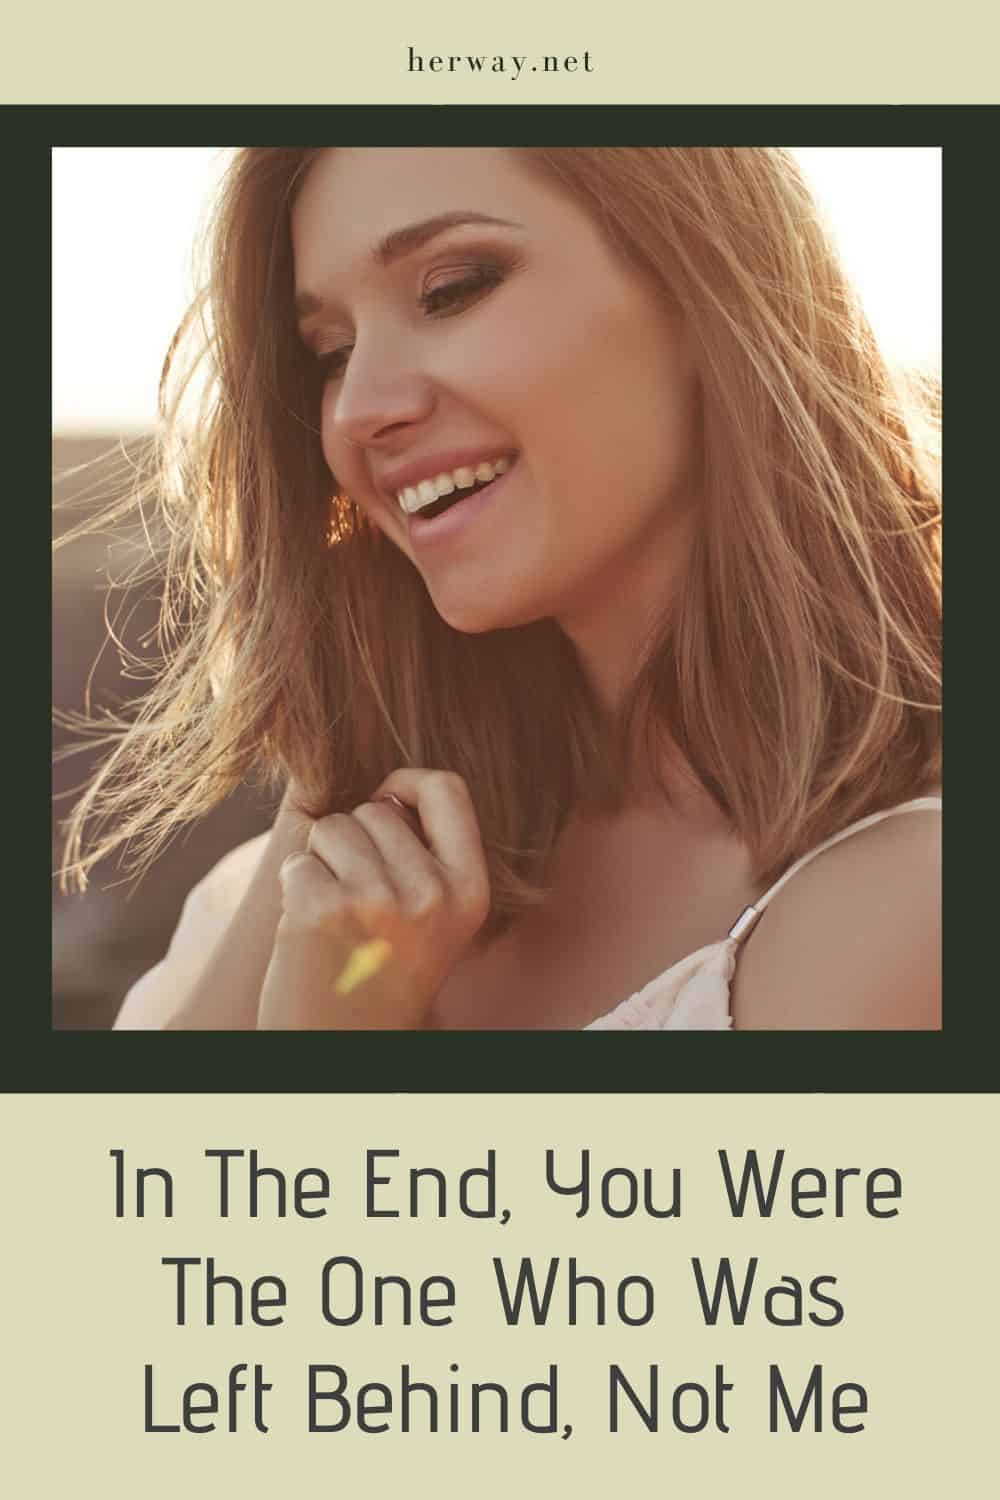 In The End, You Were The One Who Was Left Behind, Not Me